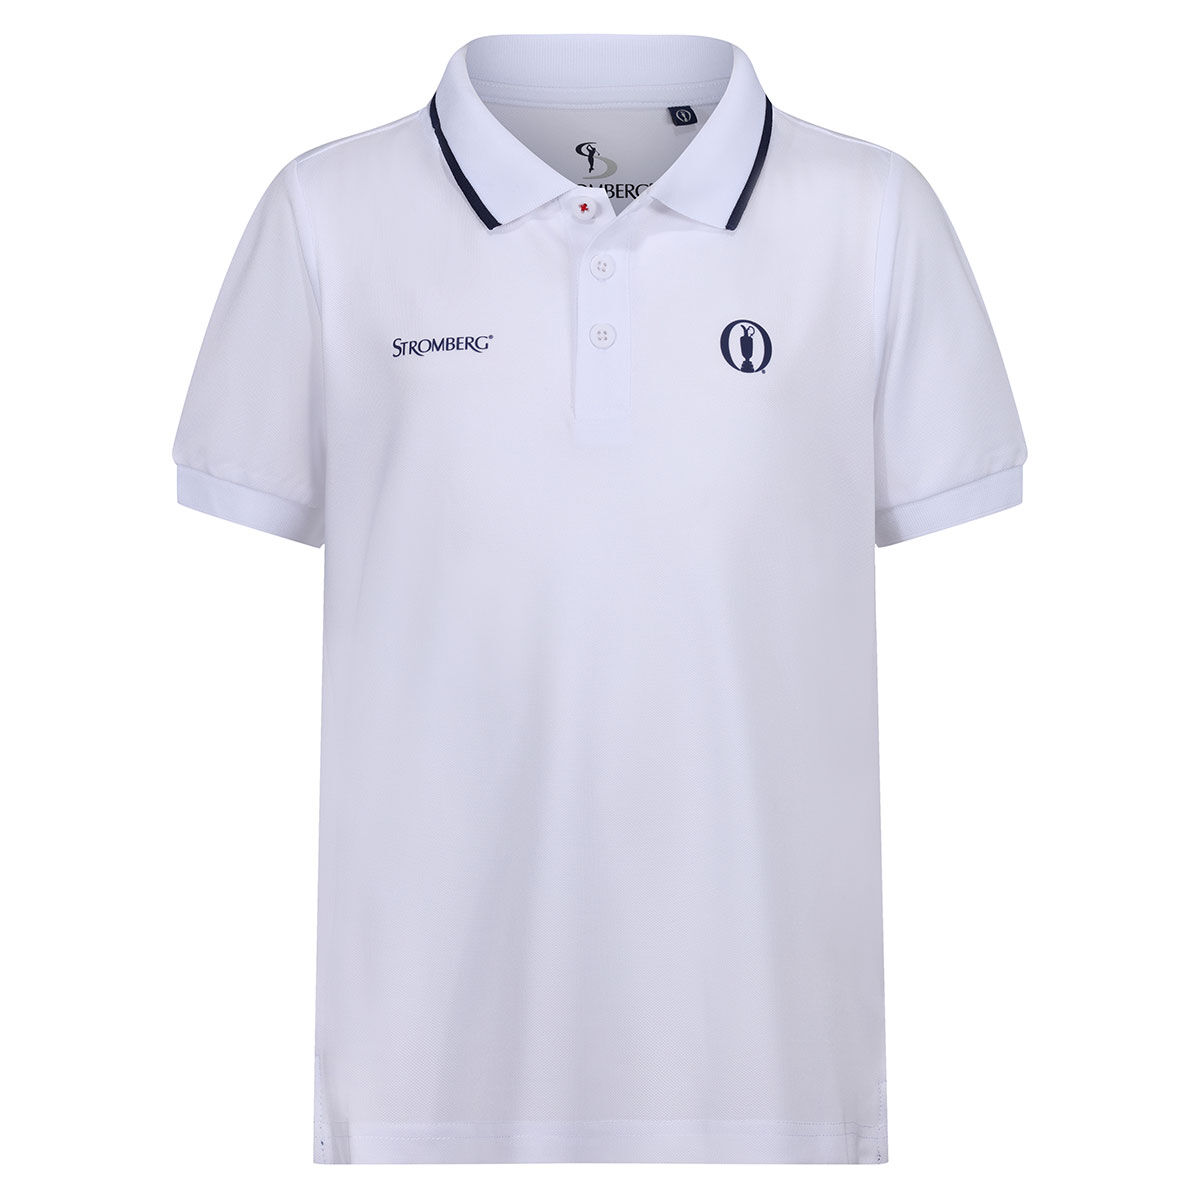 Stromberg Junior The Open Harbour Stretch Golf Polo Shirt, Unisex, Optic white, 12-13 years | American Golf